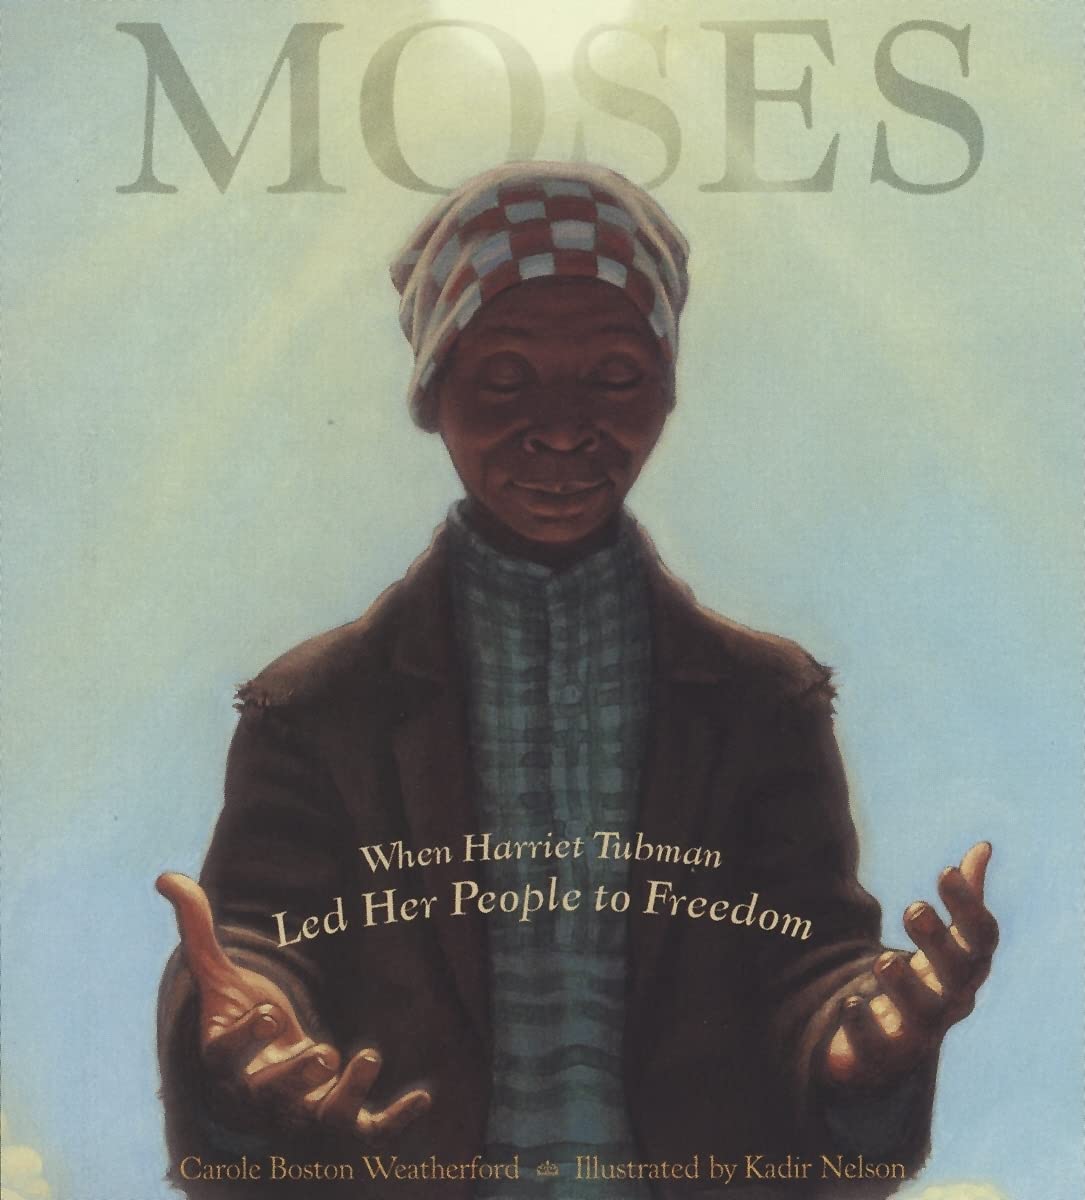 The Cover of "Moses"-an illustration of Harriet Tubman her arms open with the sun above her head.